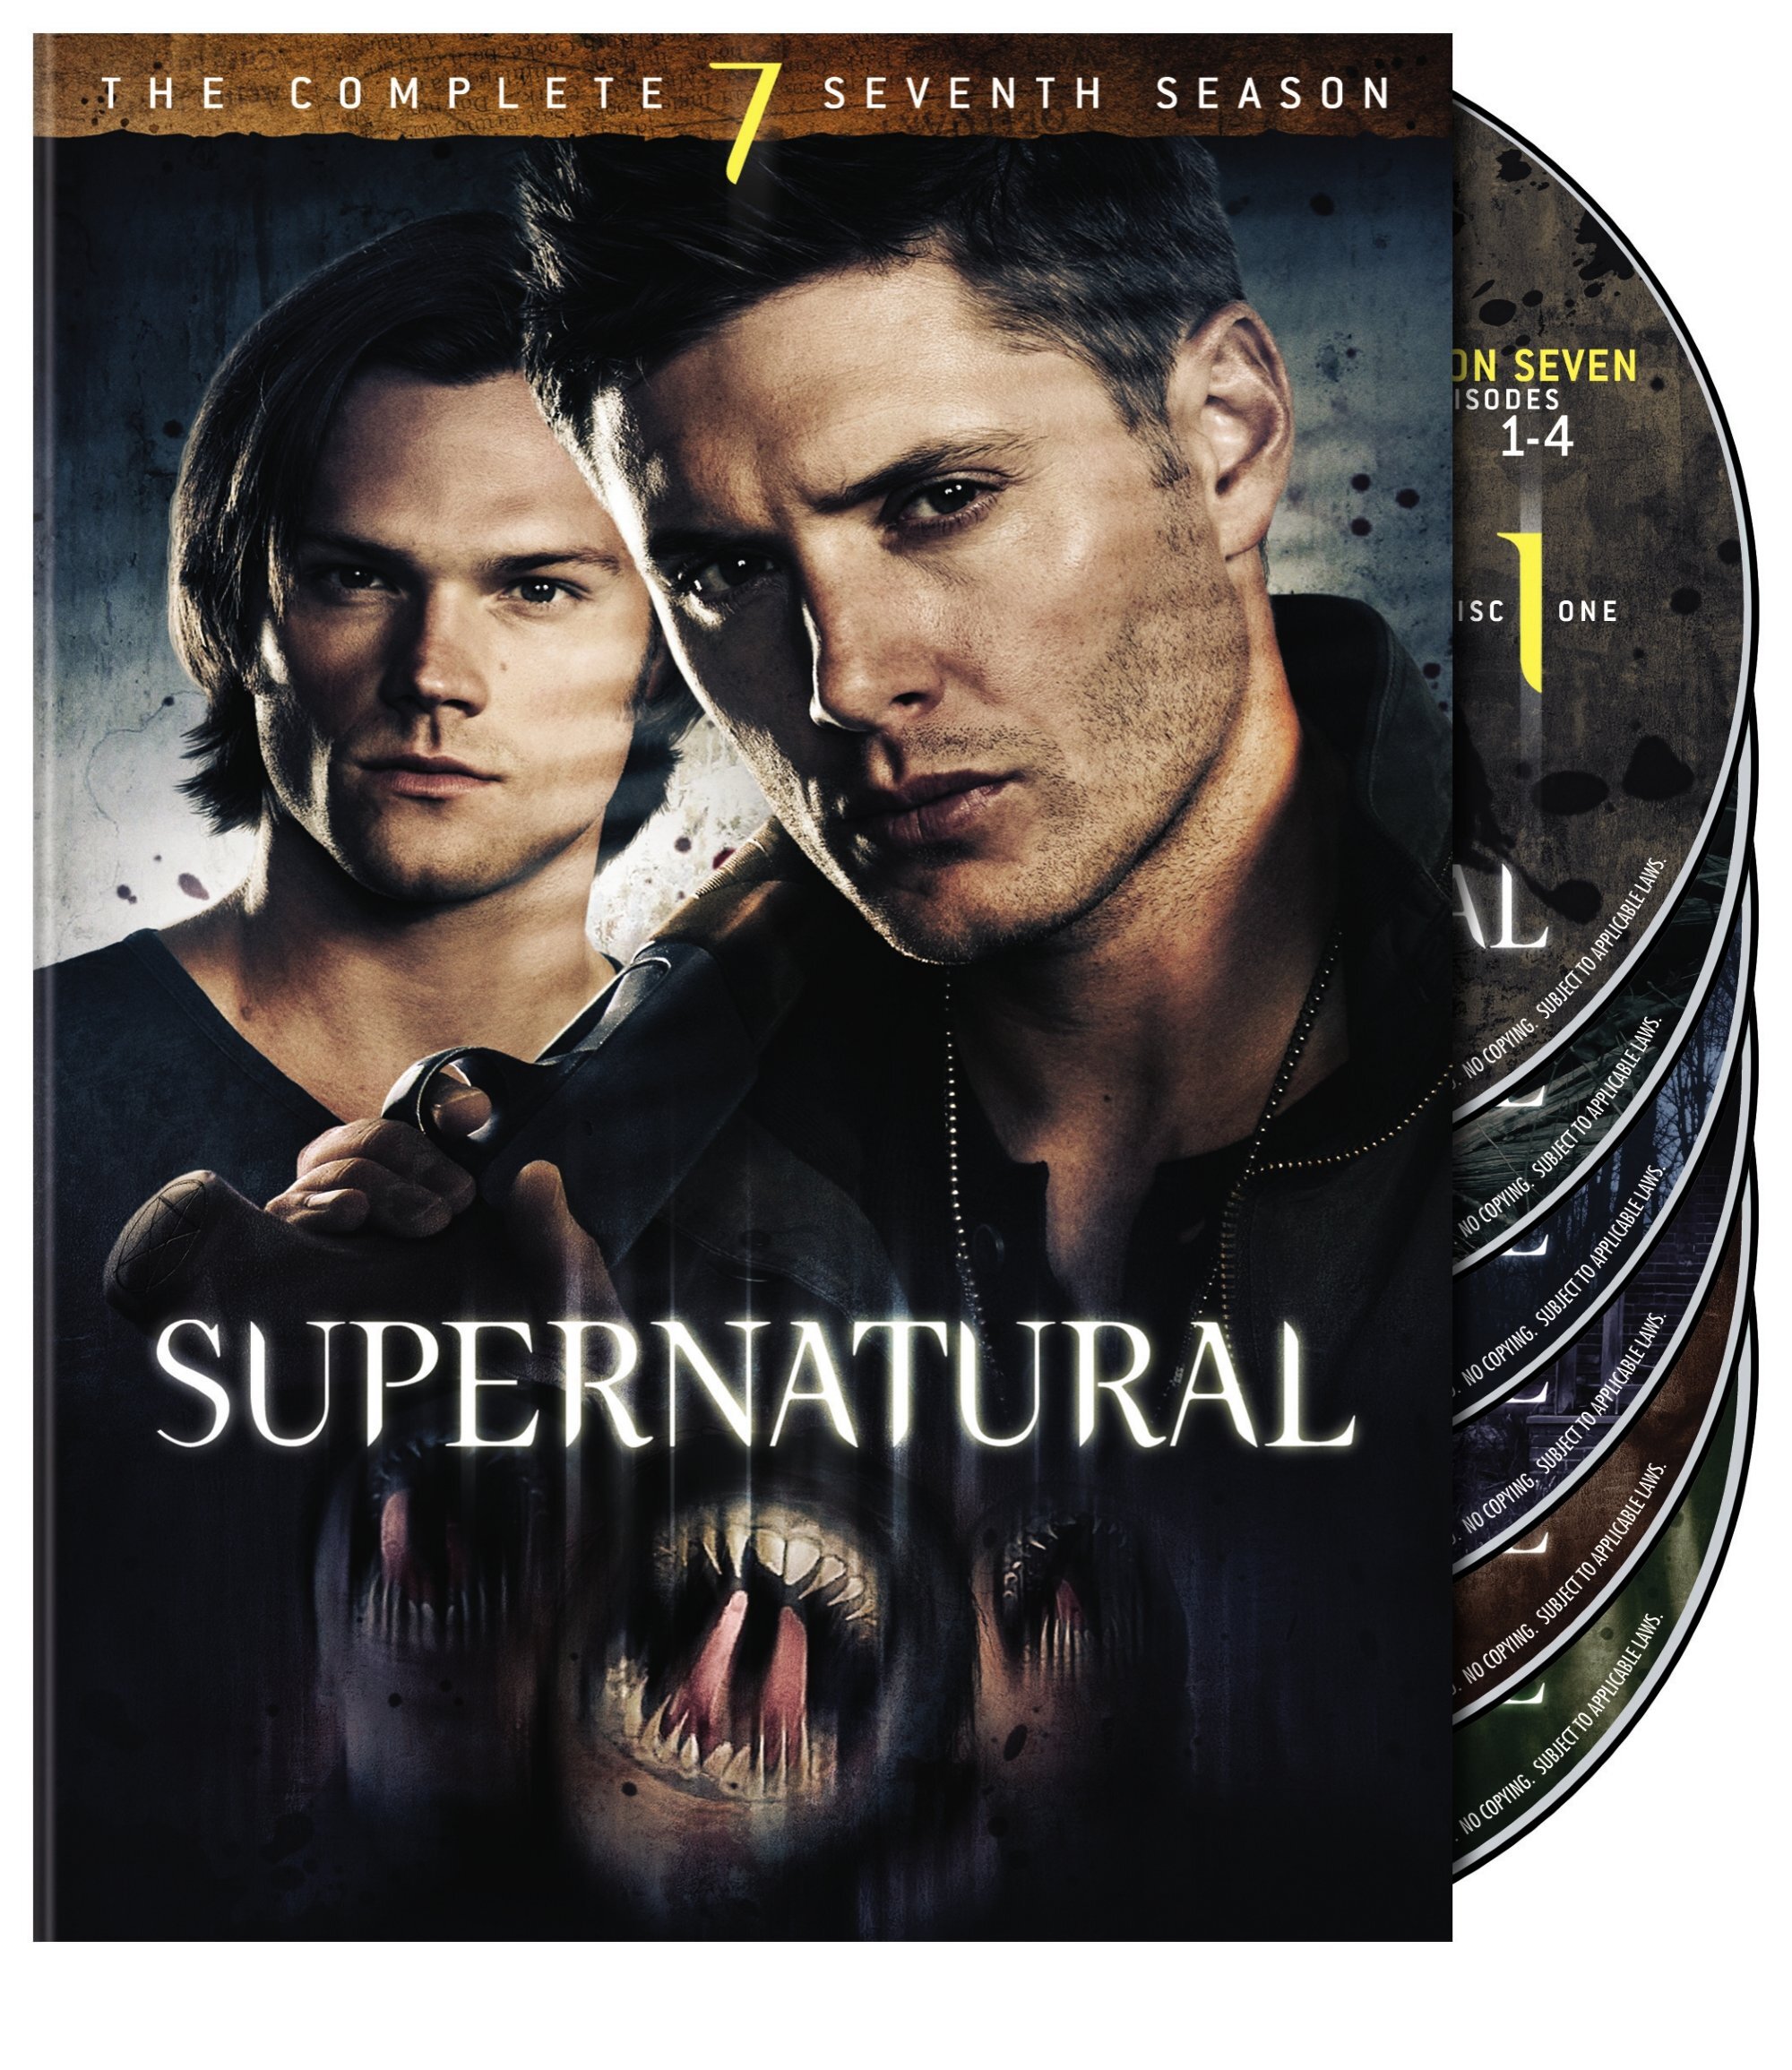 Supernatural: The Complete Seventh Season (Box Set) - DVD [ 2012 ]  - Sci Fi Television On DVD - TV Shows On GRUV